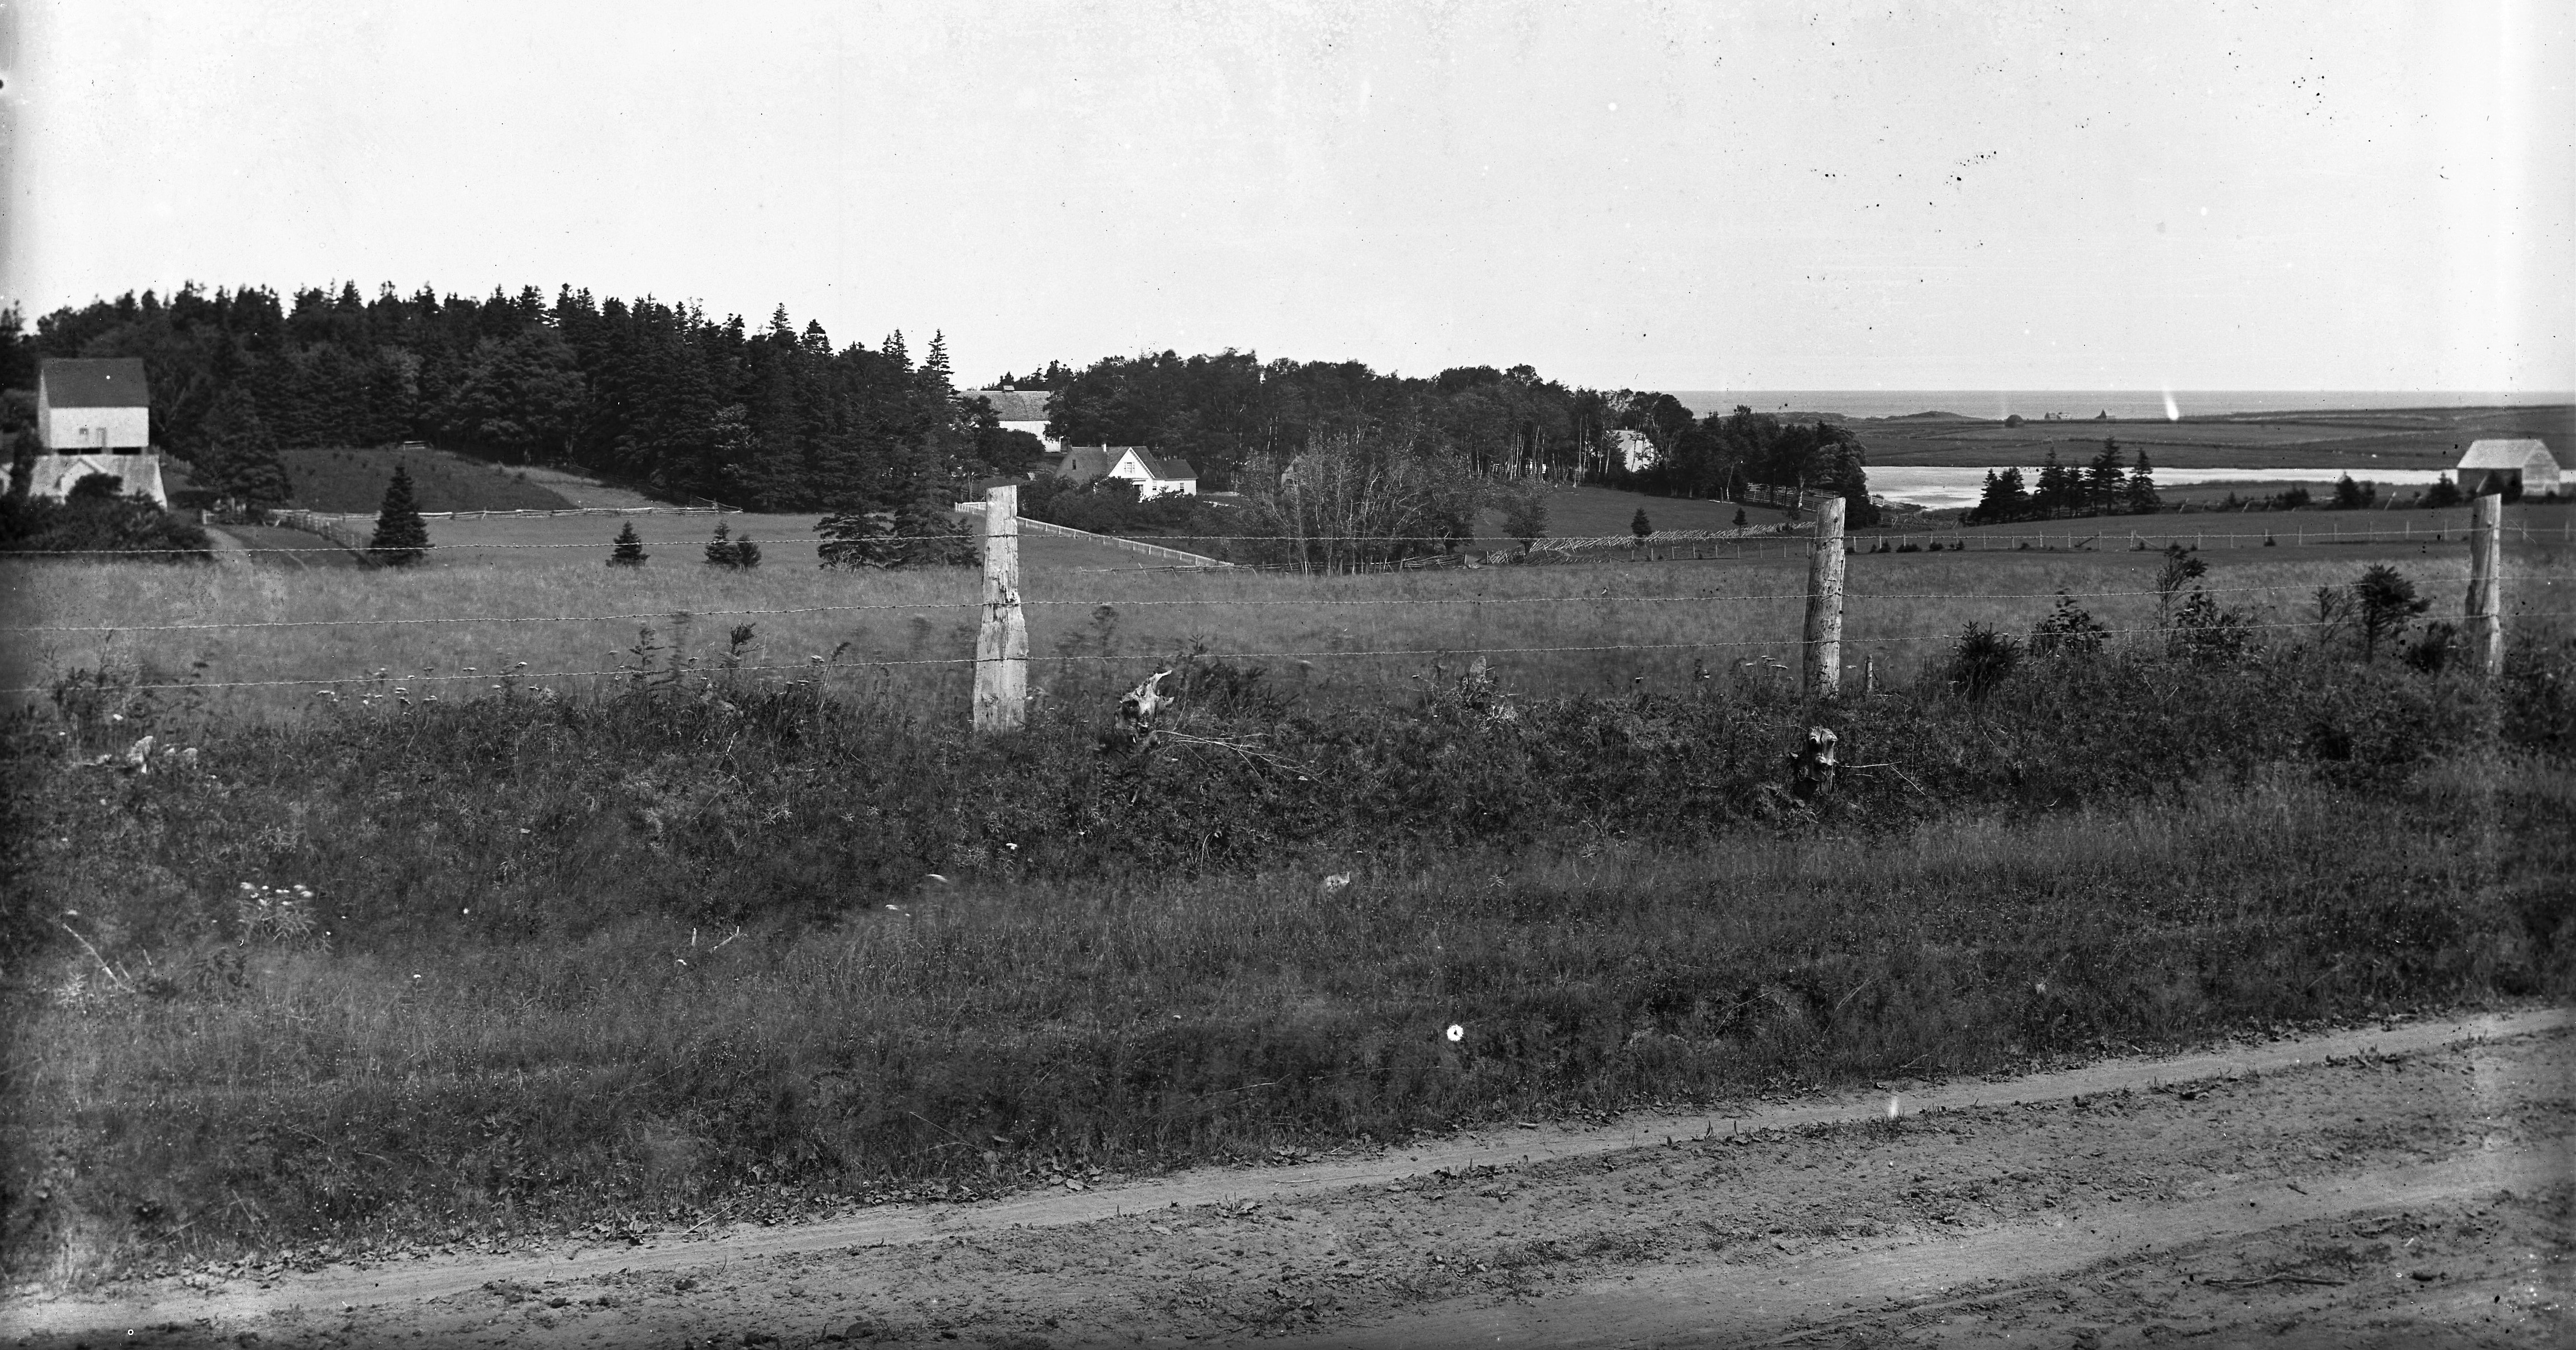 Black-and-white photograph of Cavendish. In the foreground is a fence in a field and in the background is a body of water behind farmland.